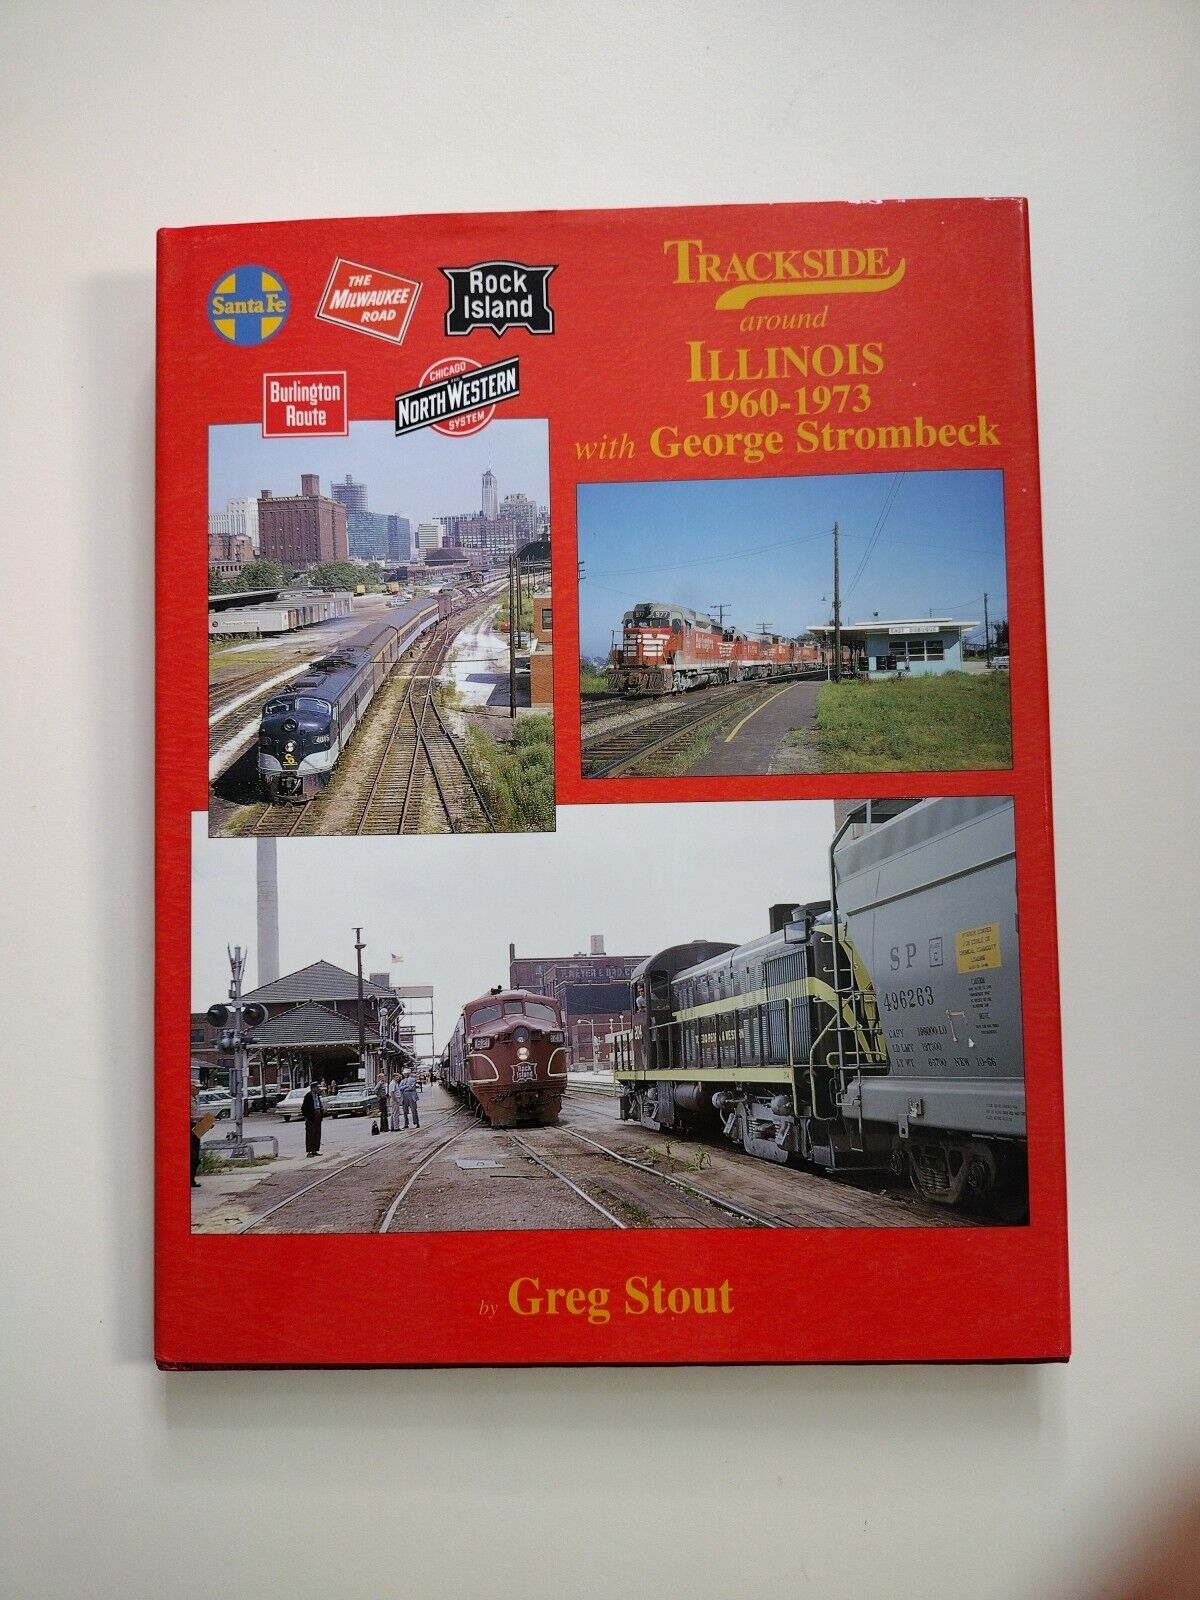 Trackside Around Illinois 1960-1973 with George Strombeck by Greg Stout  w/DJ